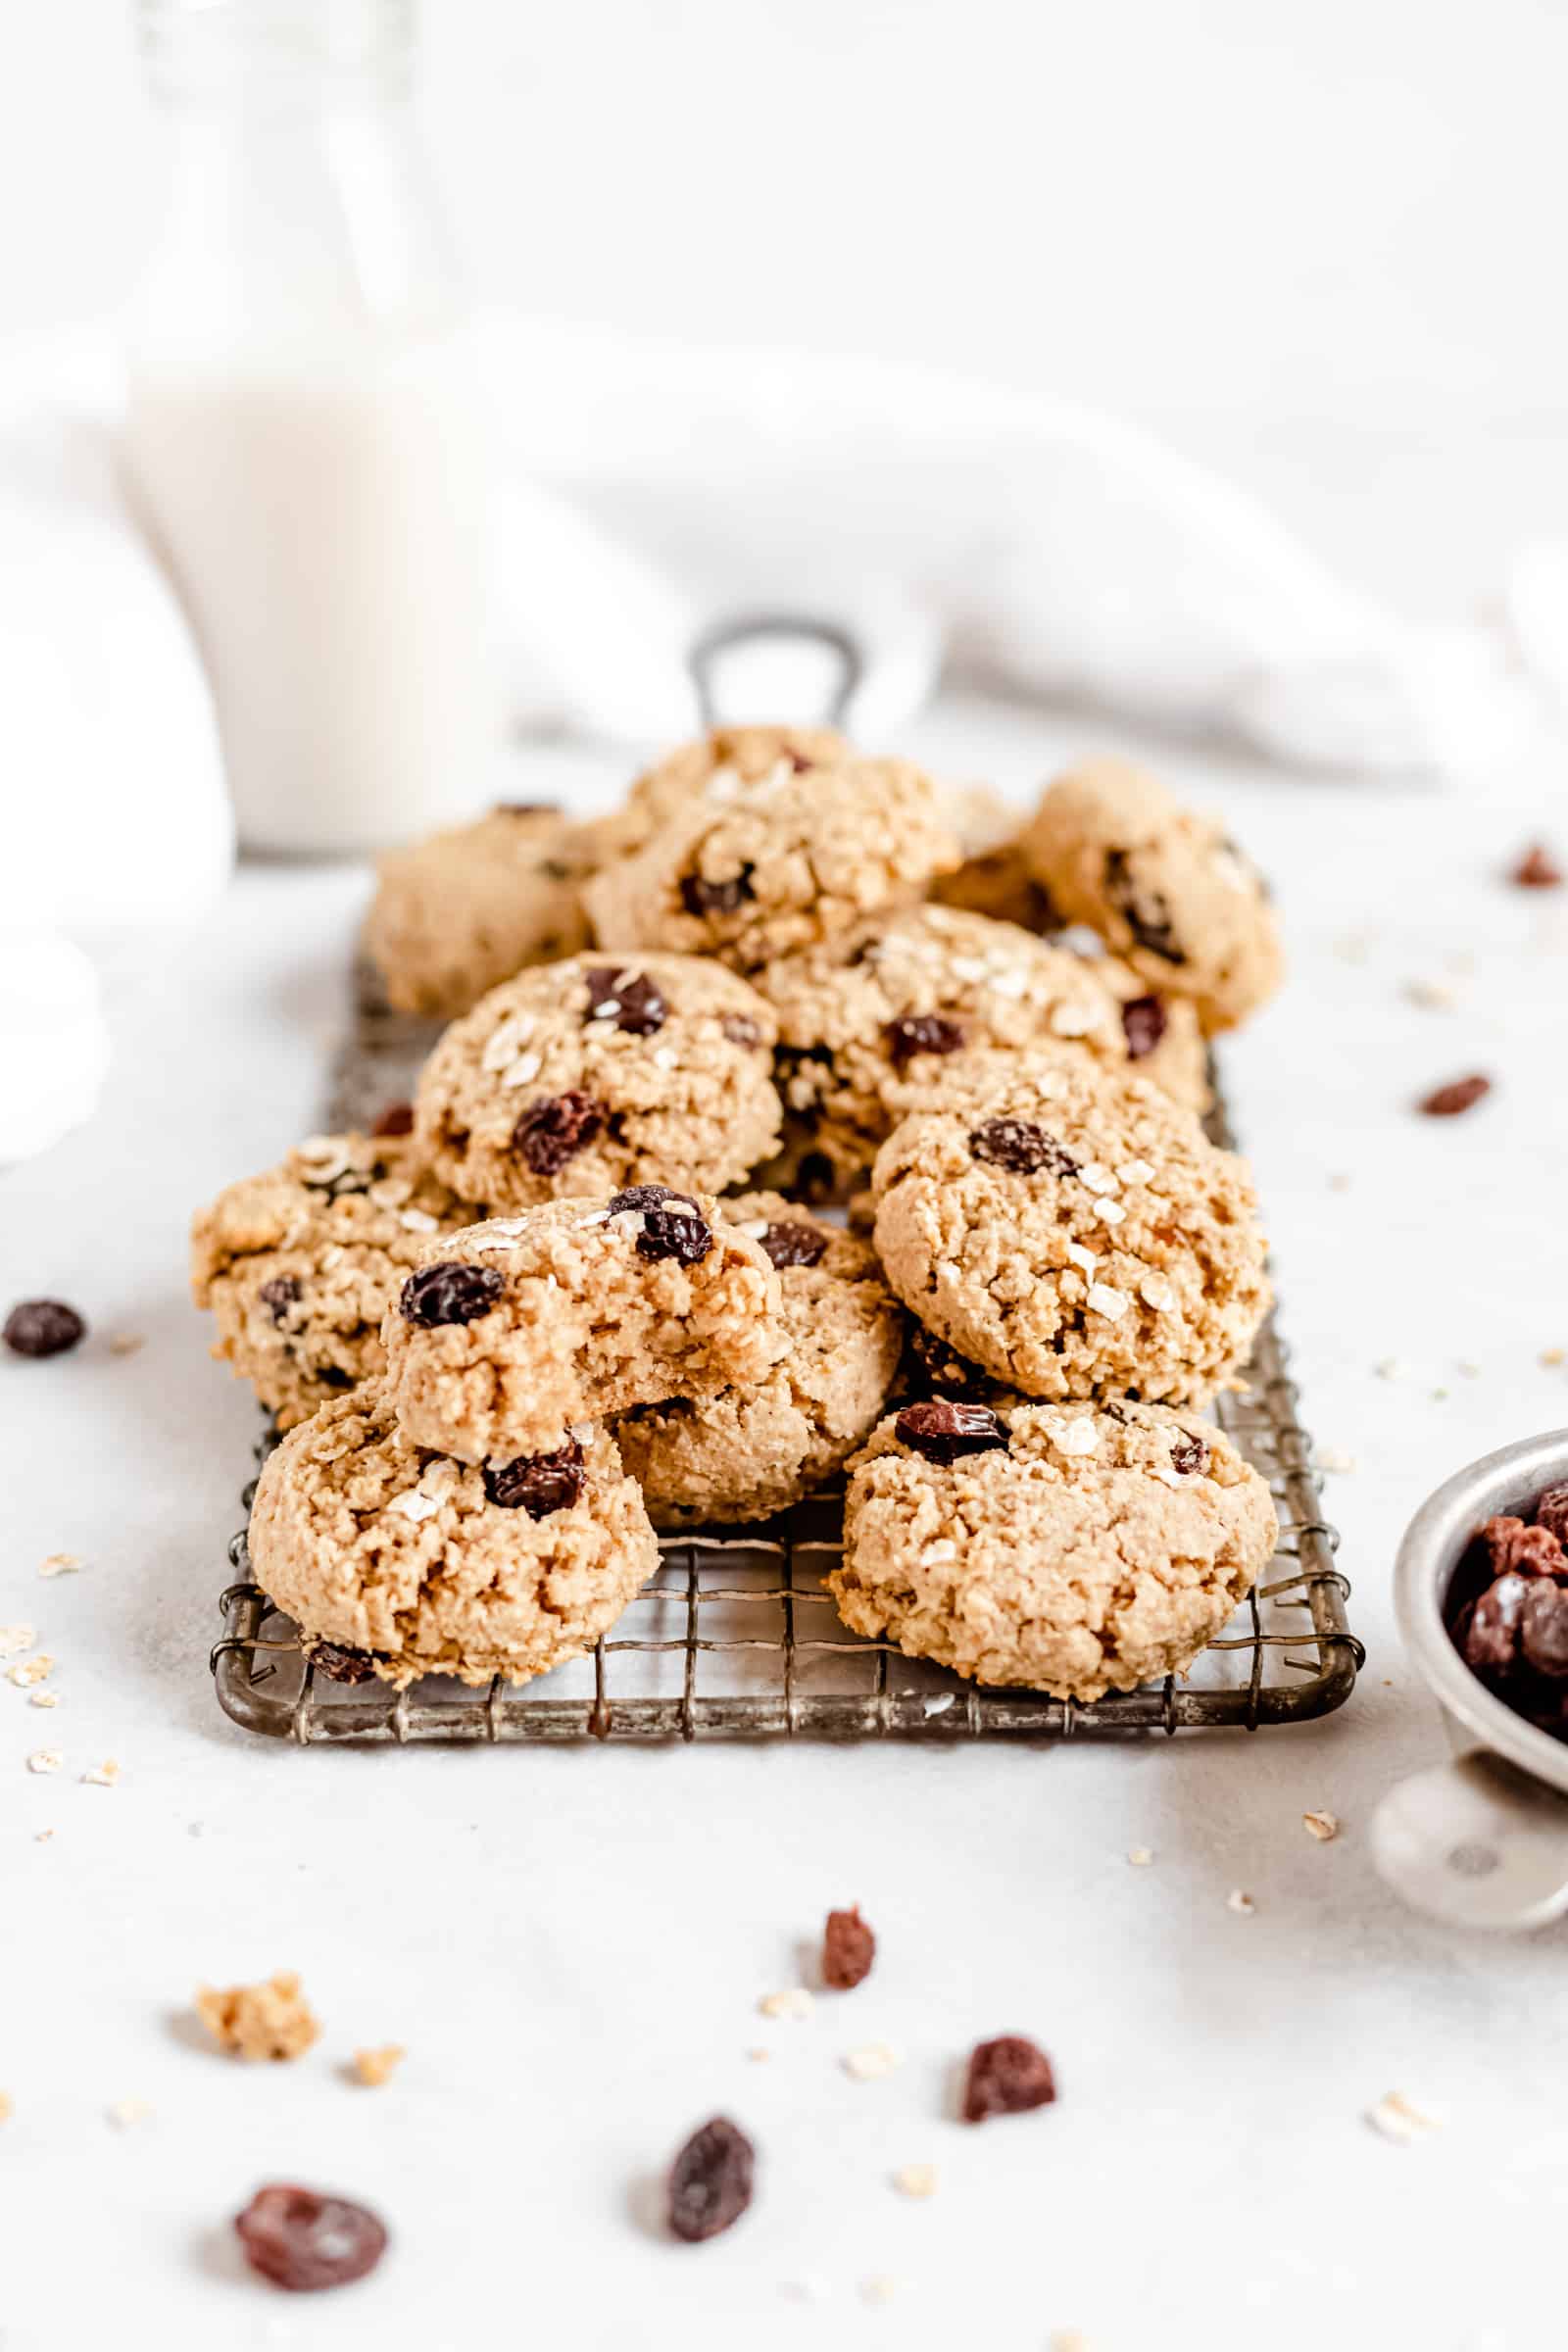 These Healthy Chewy Gluten Free Oatmeal Raisin Cookies are the best ever! They’re incredibly soft, chewy, and perfectly spiced with a hint of cinnamon. #vegan #glutenfree #oatmealraisin #cookies #healthycookies #almondflour #bakedambrosia